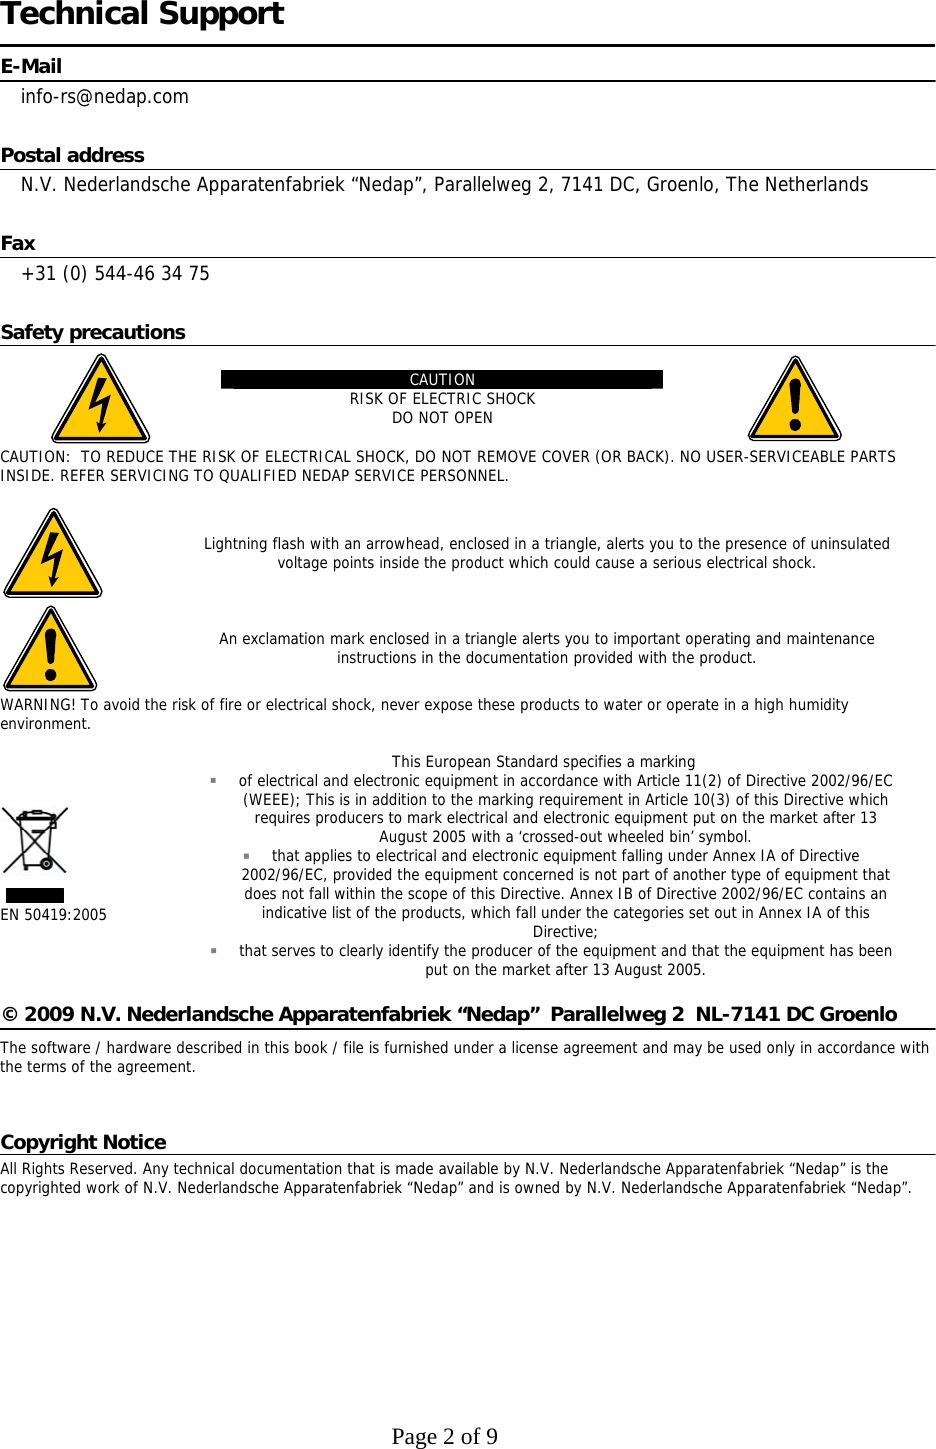     Page 2 of 9    Technical Support E-Mail info-rs@nedap.com Postal address N.V. Nederlandsche Apparatenfabriek “Nedap”, Parallelweg 2, 7141 DC, Groenlo, The Netherlands Fax +31 (0) 544-46 34 75 Safety precautions  CAUTION RISK OF ELECTRIC SHOCK DO NOT OPEN   CAUTION:  TO REDUCE THE RISK OF ELECTRICAL SHOCK, DO NOT REMOVE COVER (OR BACK). NO USER-SERVICEABLE PARTS INSIDE. REFER SERVICING TO QUALIFIED NEDAP SERVICE PERSONNEL.   Lightning flash with an arrowhead, enclosed in a triangle, alerts you to the presence of uninsulated voltage points inside the product which could cause a serious electrical shock.  An exclamation mark enclosed in a triangle alerts you to important operating and maintenance instructions in the documentation provided with the product. WARNING! To avoid the risk of fire or electrical shock, never expose these products to water or operate in a high humidity environment.   EN 50419:2005 This European Standard specifies a marking  of electrical and electronic equipment in accordance with Article 11(2) of Directive 2002/96/EC (WEEE); This is in addition to the marking requirement in Article 10(3) of this Directive which requires producers to mark electrical and electronic equipment put on the market after 13 August 2005 with a ‘crossed-out wheeled bin’ symbol.  that applies to electrical and electronic equipment falling under Annex IA of Directive 2002/96/EC, provided the equipment concerned is not part of another type of equipment that does not fall within the scope of this Directive. Annex IB of Directive 2002/96/EC contains an indicative list of the products, which fall under the categories set out in Annex IA of this Directive;  that serves to clearly identify the producer of the equipment and that the equipment has been put on the market after 13 August 2005.  © 2009 N.V. Nederlandsche Apparatenfabriek “Nedap”  Parallelweg 2  NL-7141 DC Groenlo    The software / hardware described in this book / file is furnished under a license agreement and may be used only in accordance with the terms of the agreement.  Copyright Notice All Rights Reserved. Any technical documentation that is made available by N.V. Nederlandsche Apparatenfabriek “Nedap” is the copyrighted work of N.V. Nederlandsche Apparatenfabriek “Nedap” and is owned by N.V. Nederlandsche Apparatenfabriek “Nedap”.  